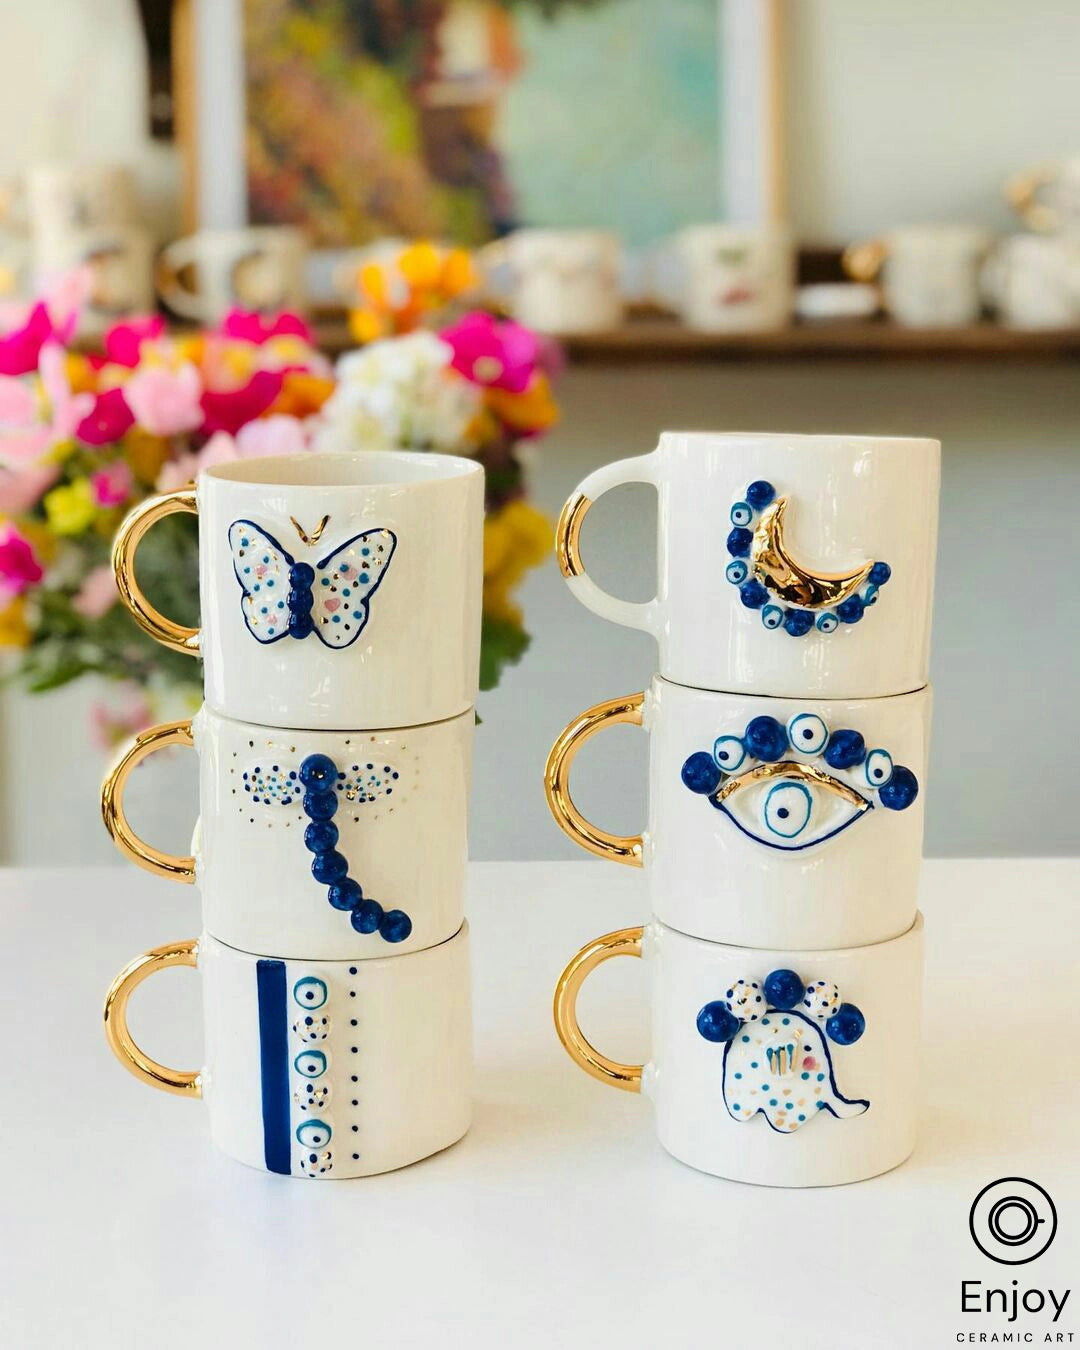 A stack of four elegant white ceramic mugs with golden handles, each adorned with a different blue motif. The designs include a butterfly, an evil eye, and abstract dots, creating a charming and artistic display against a backdrop of vibrant flowers and a bright, airy room.